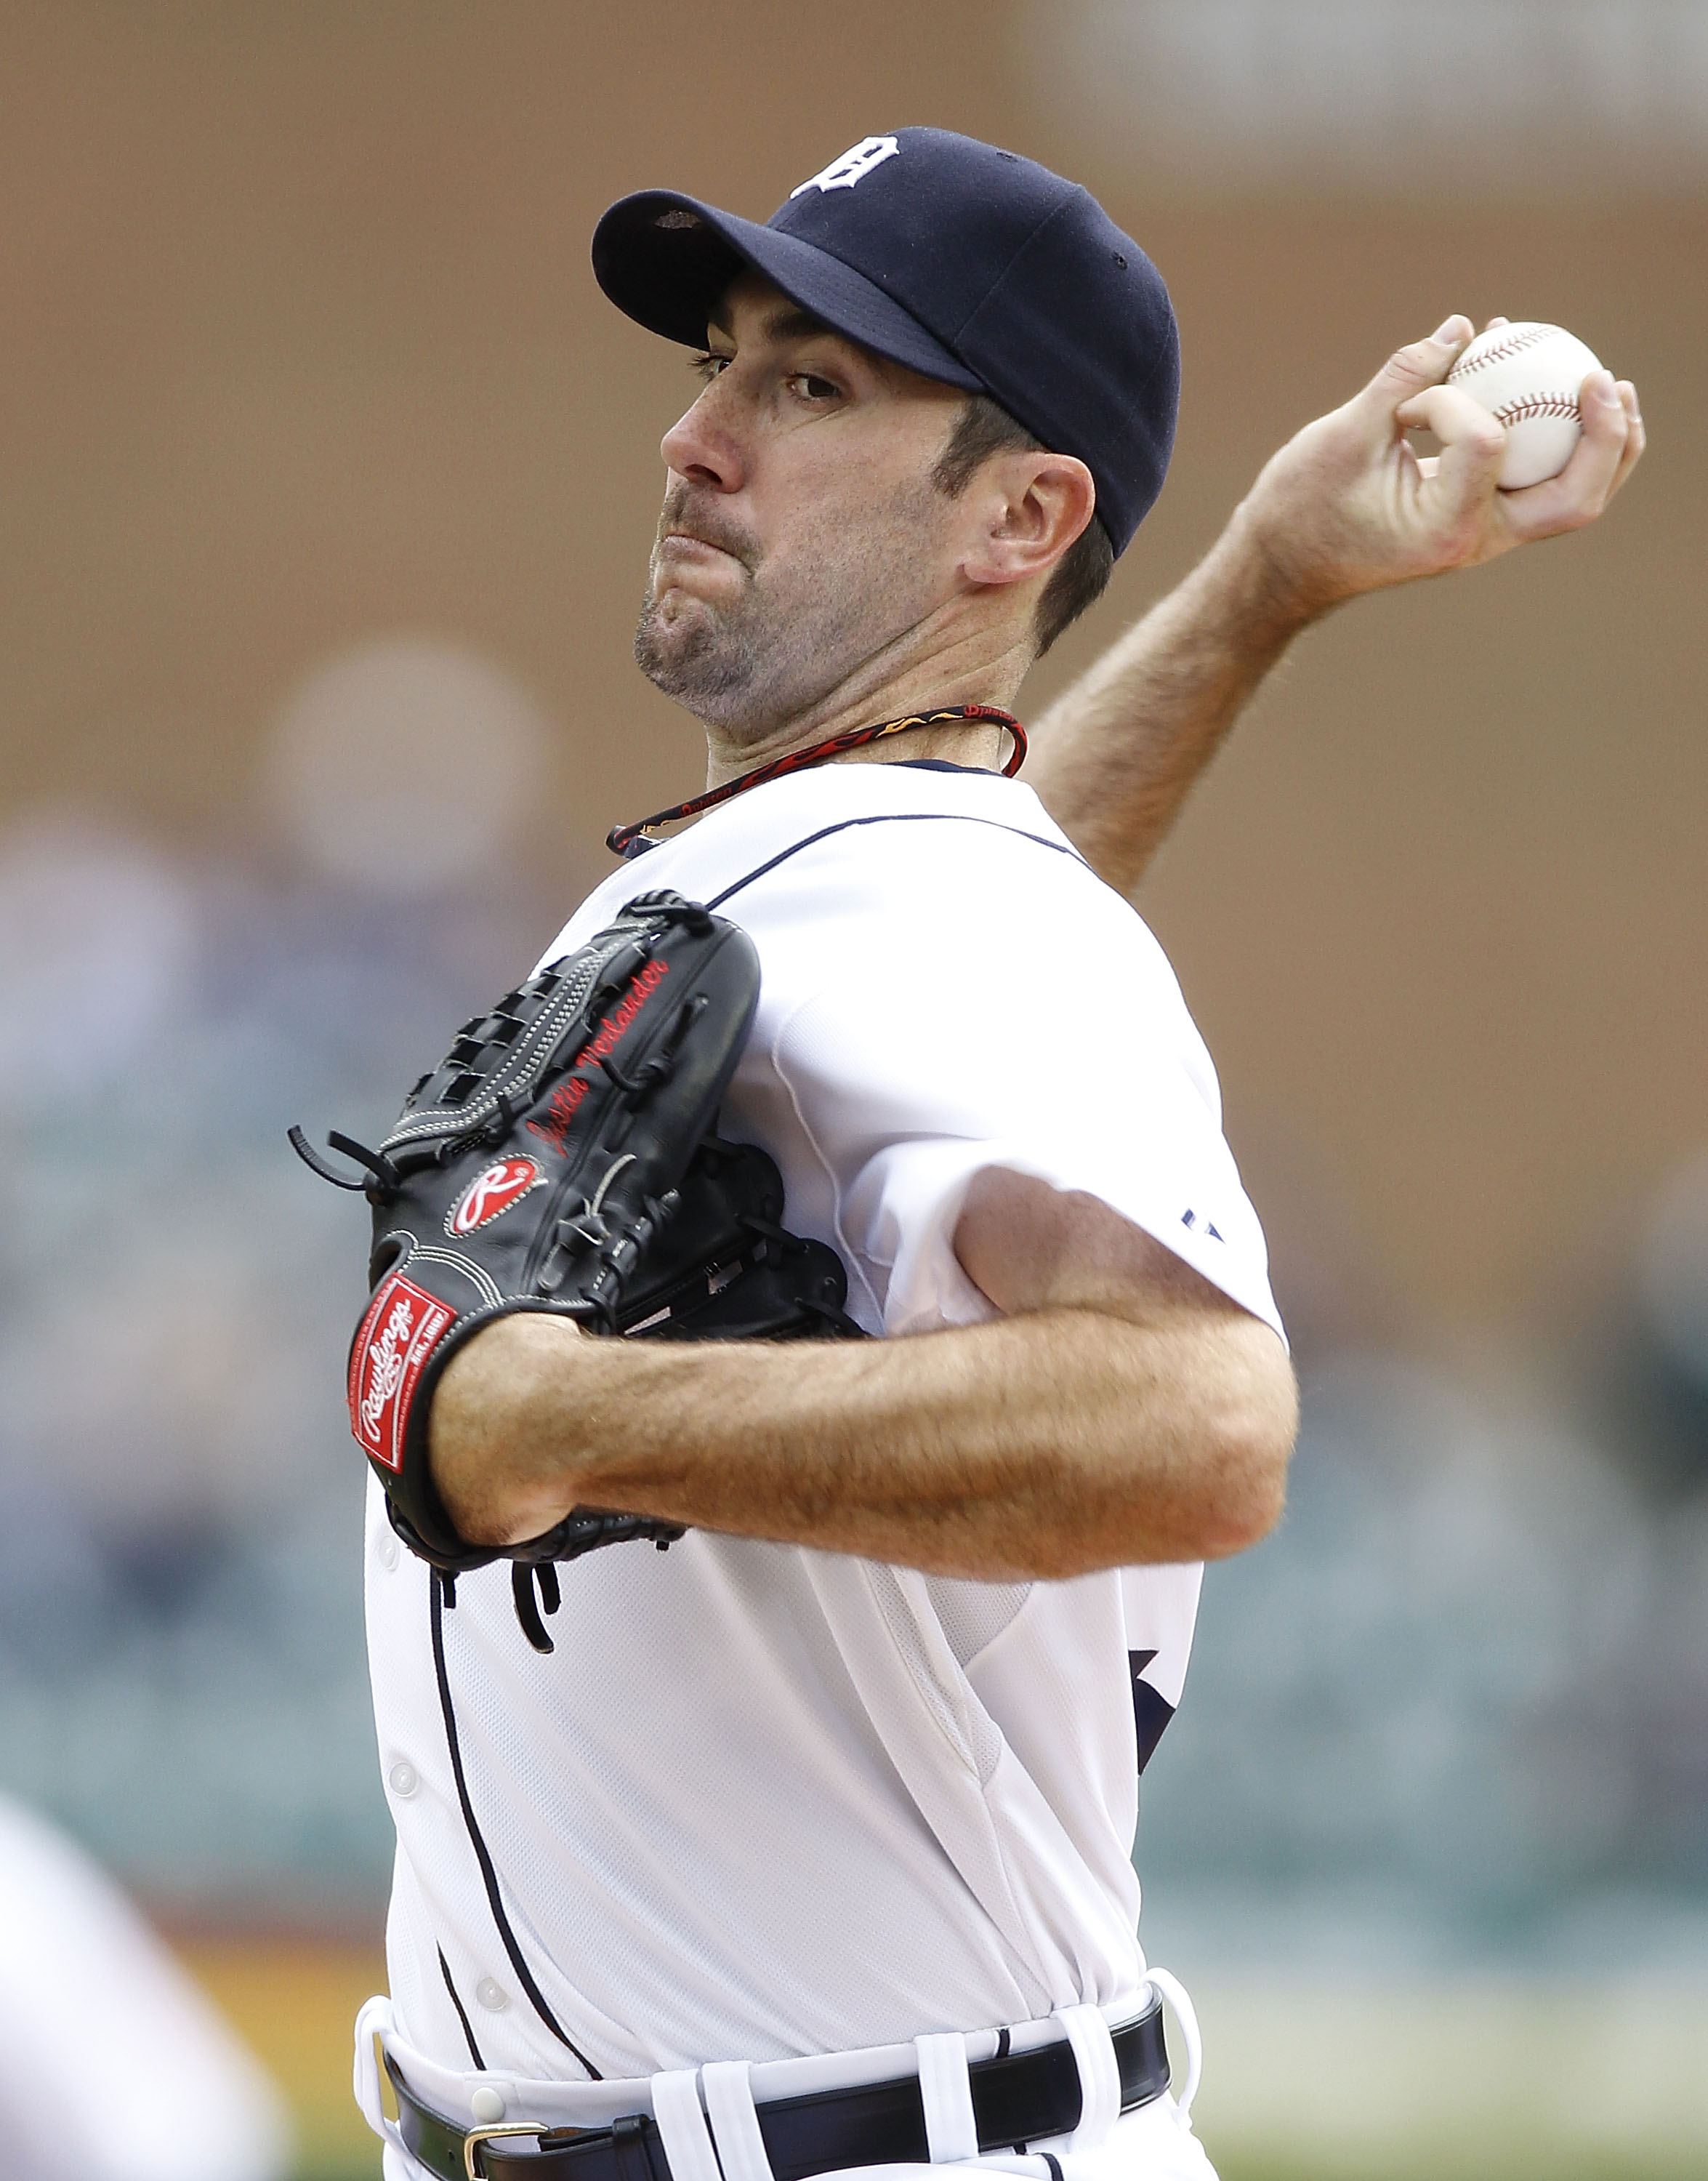 Justin Verlander's no-hitter has helped the Tigers move way up in these rankings.